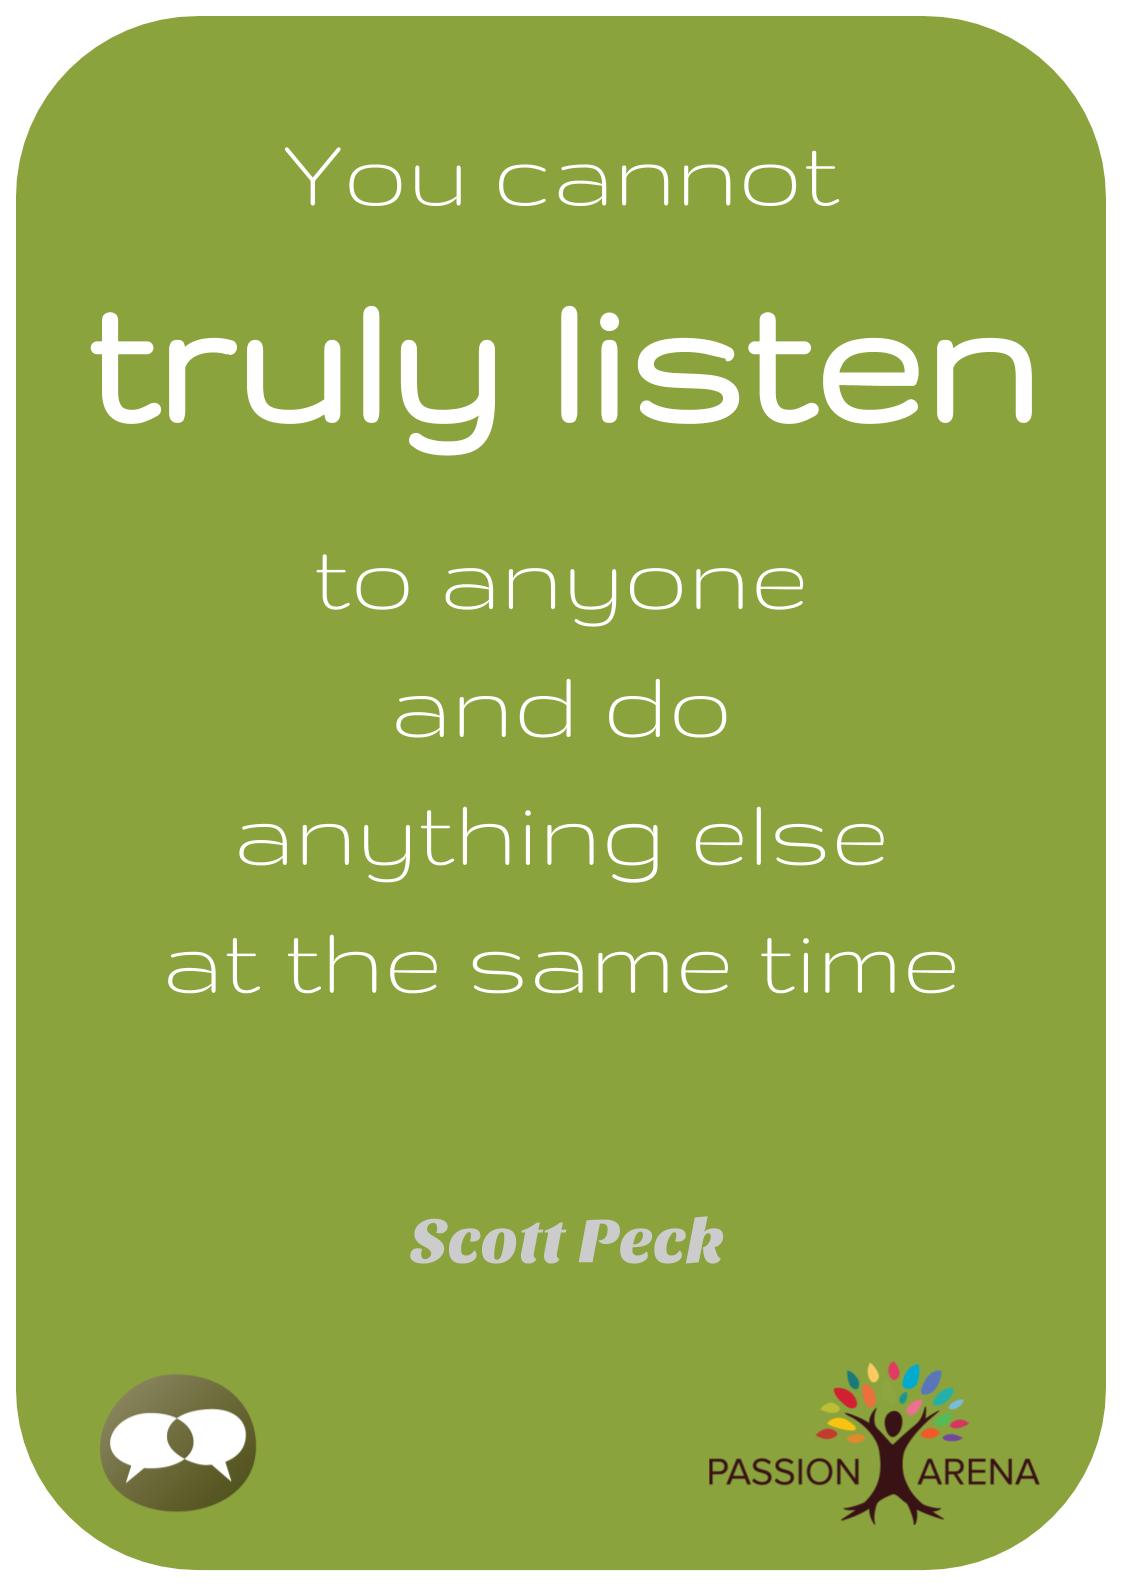 Intro-3-34. Are you a good listener?